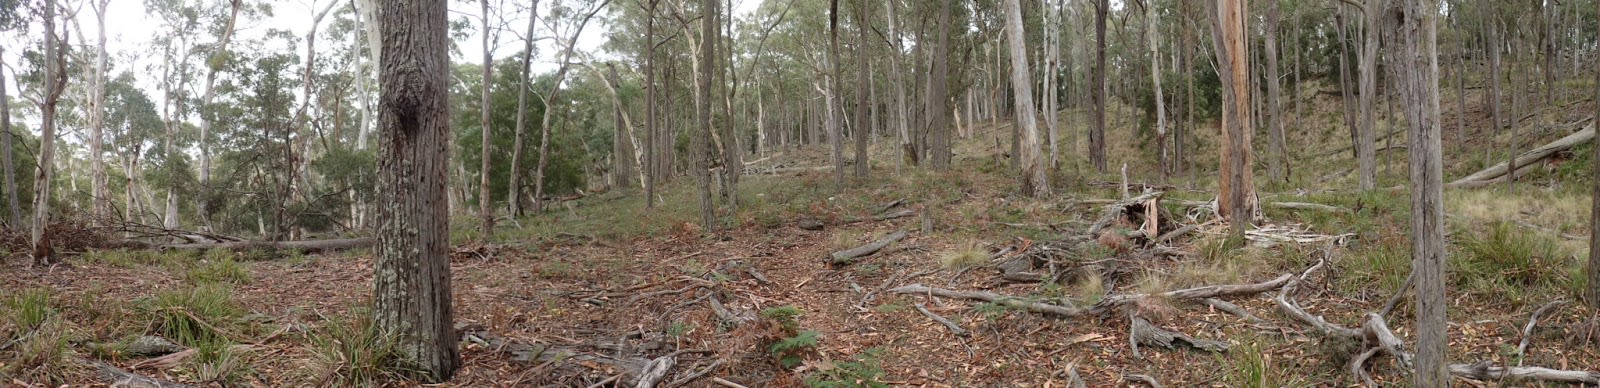 Panorama of the Stringybark dominated forest near Bald Hills campground